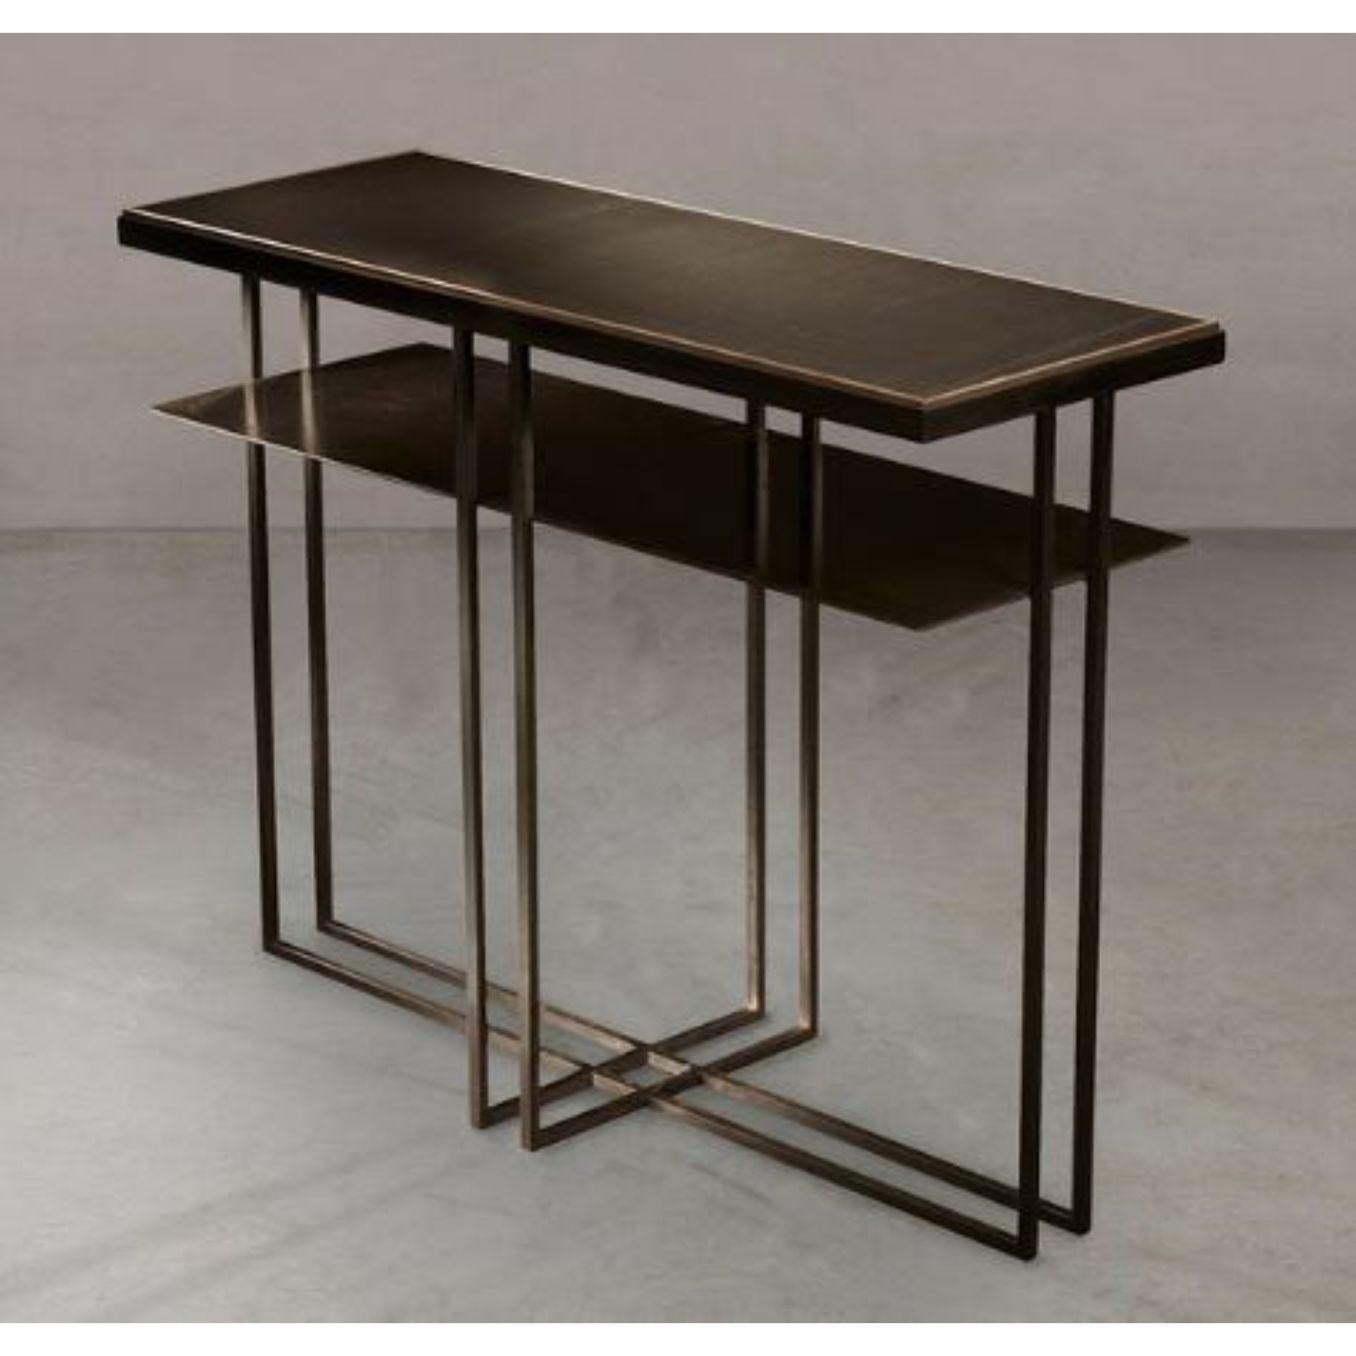 Slate cross Binate side table by Novocastrian
Dimensions: W 25 x D 71 x H 55 cm 
Materials: A range of Cumbrian slates, blackened steel, hand patinated brass, limestone.
Also available in different dimensions.


Novocastrian

We are